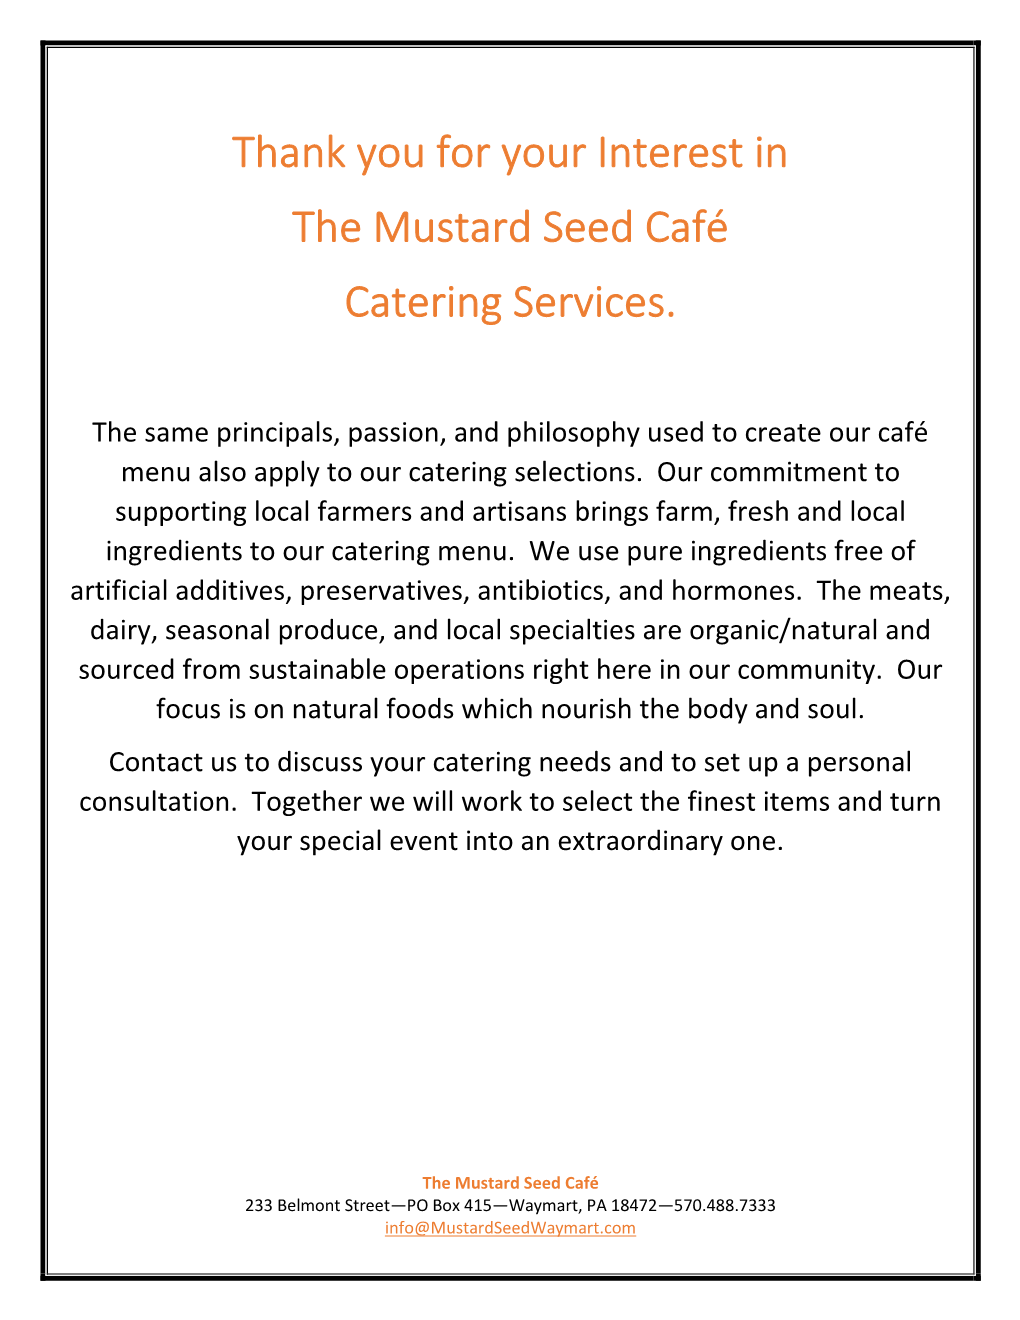 Thank You for Your Interest in the Mustard Seed Café Catering Services